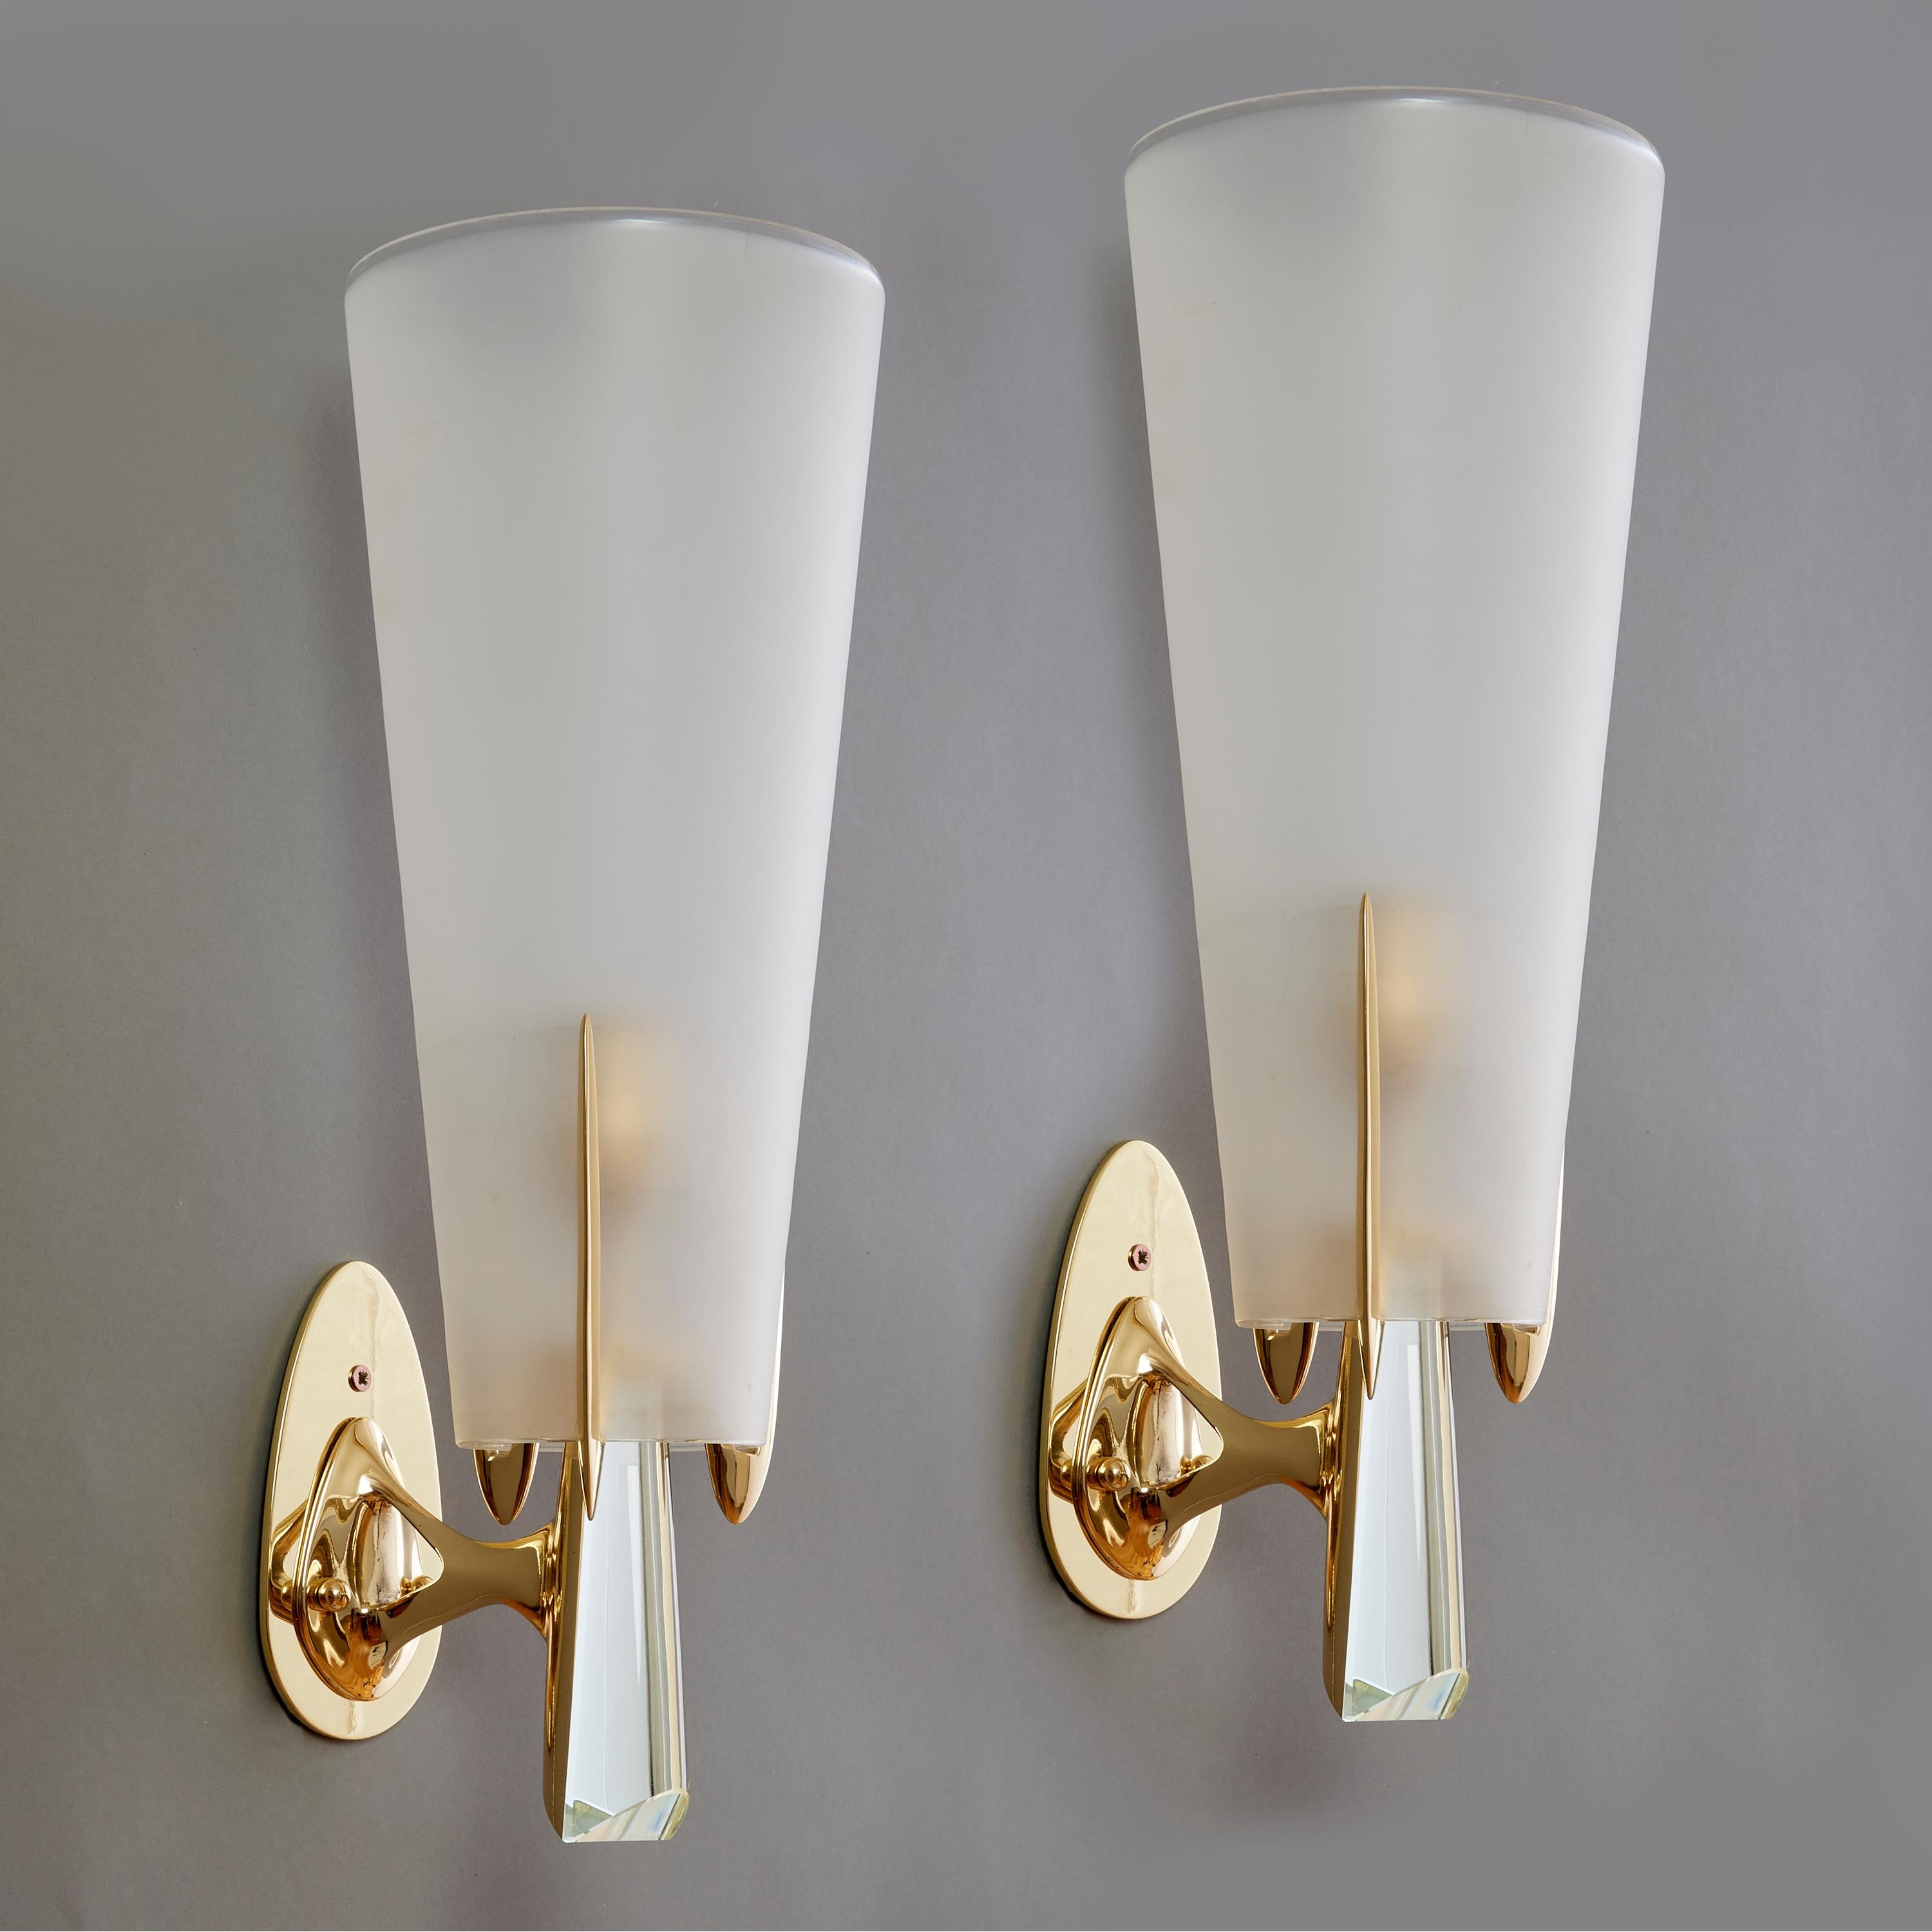 Max Ingrand for Fontana Arte: Rare Sconces in Brass and Crystal, Italy 1955 For Sale 8